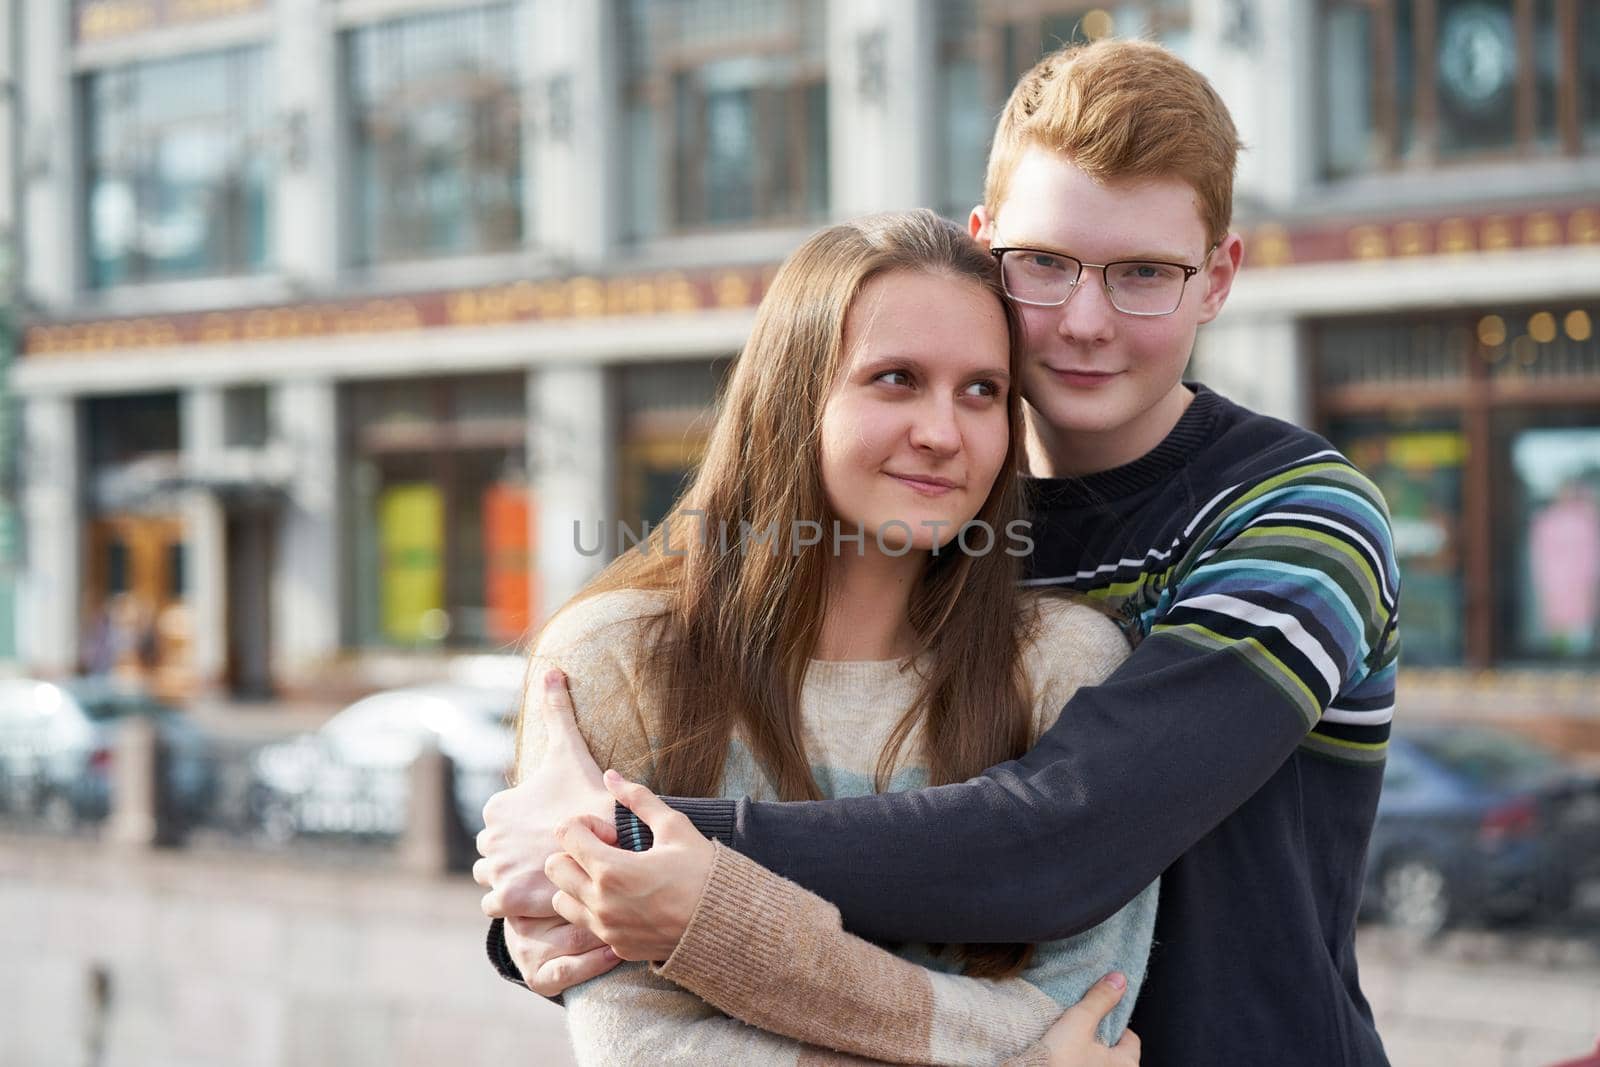 portrait of happy couple embracing in downtown, red-haired man with glasses looking straight, woman with long hair looking away, copy space